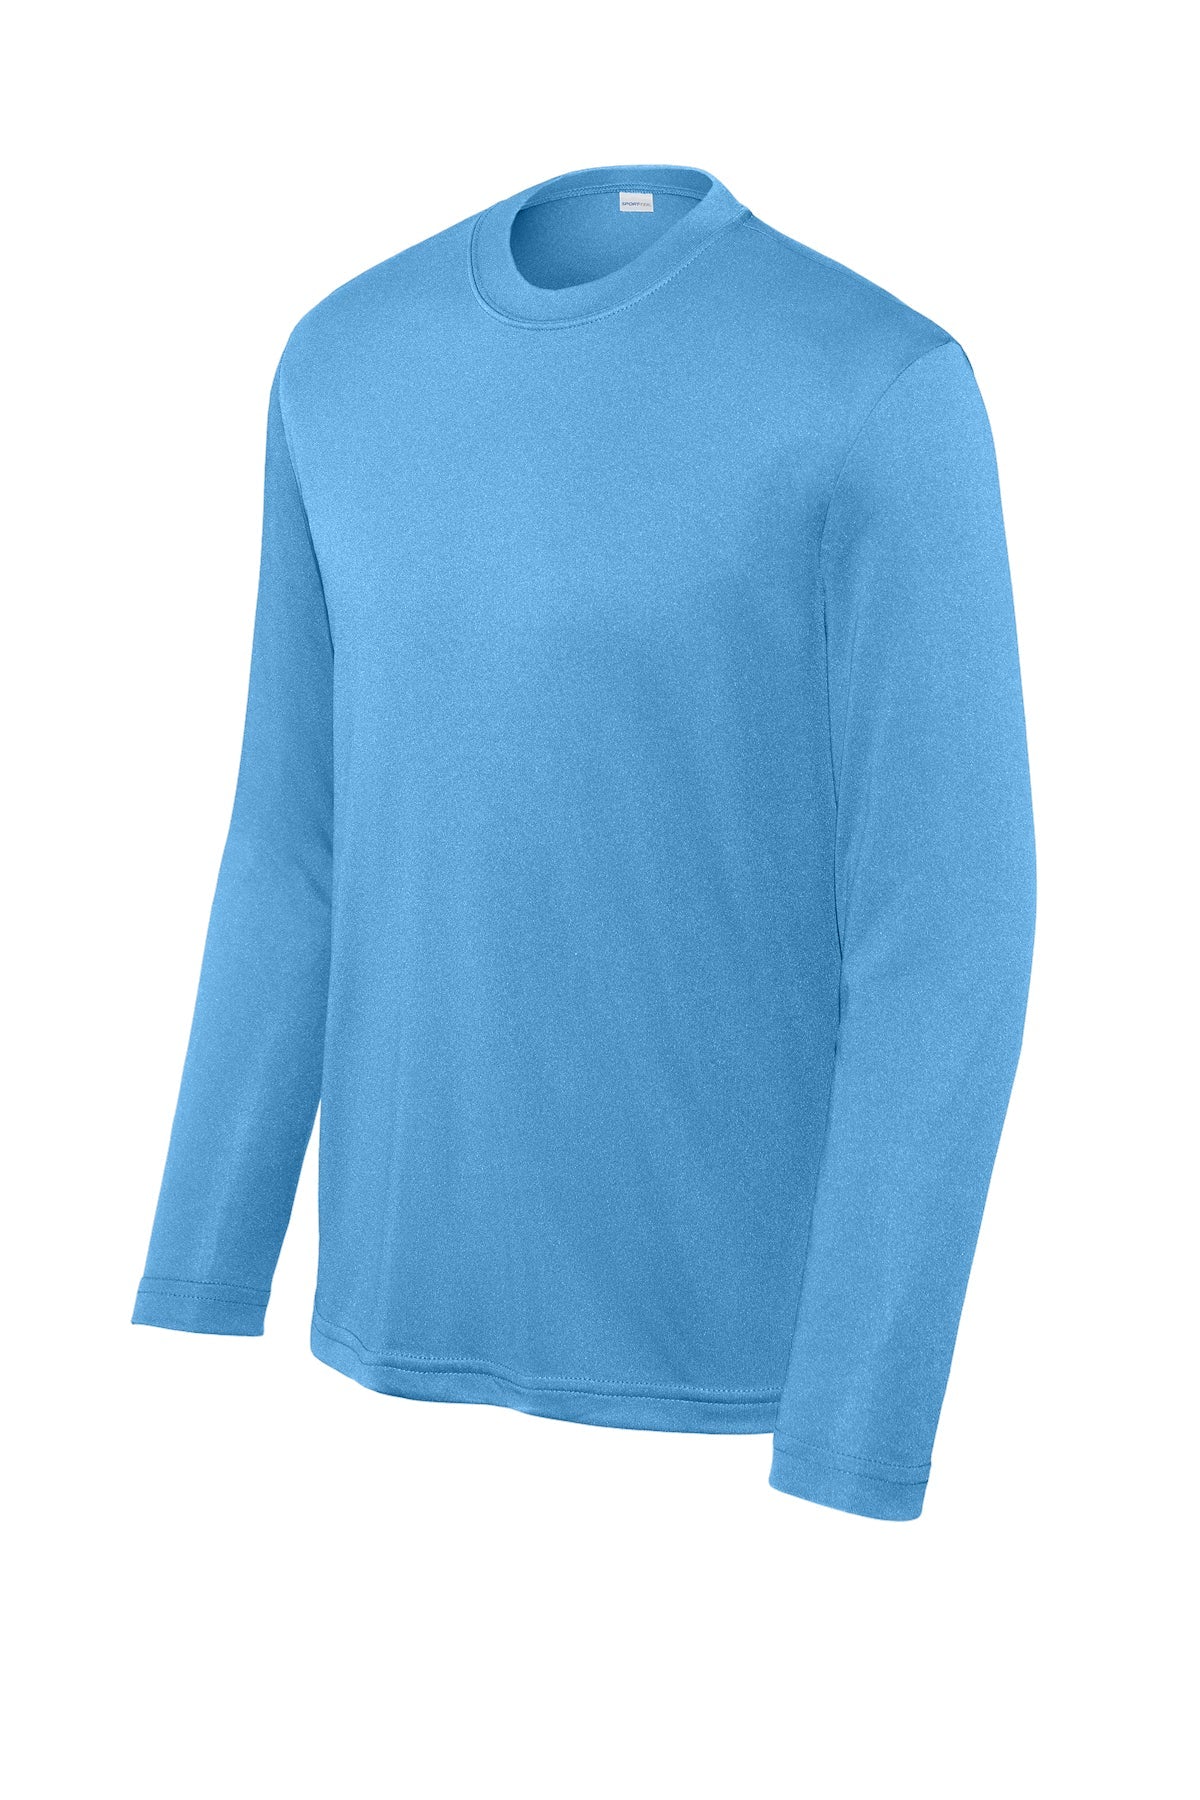 YST350LS Sport-Tek® Youth Long Sleeve PosiCharge® Competitor™ Tee. XS-XL